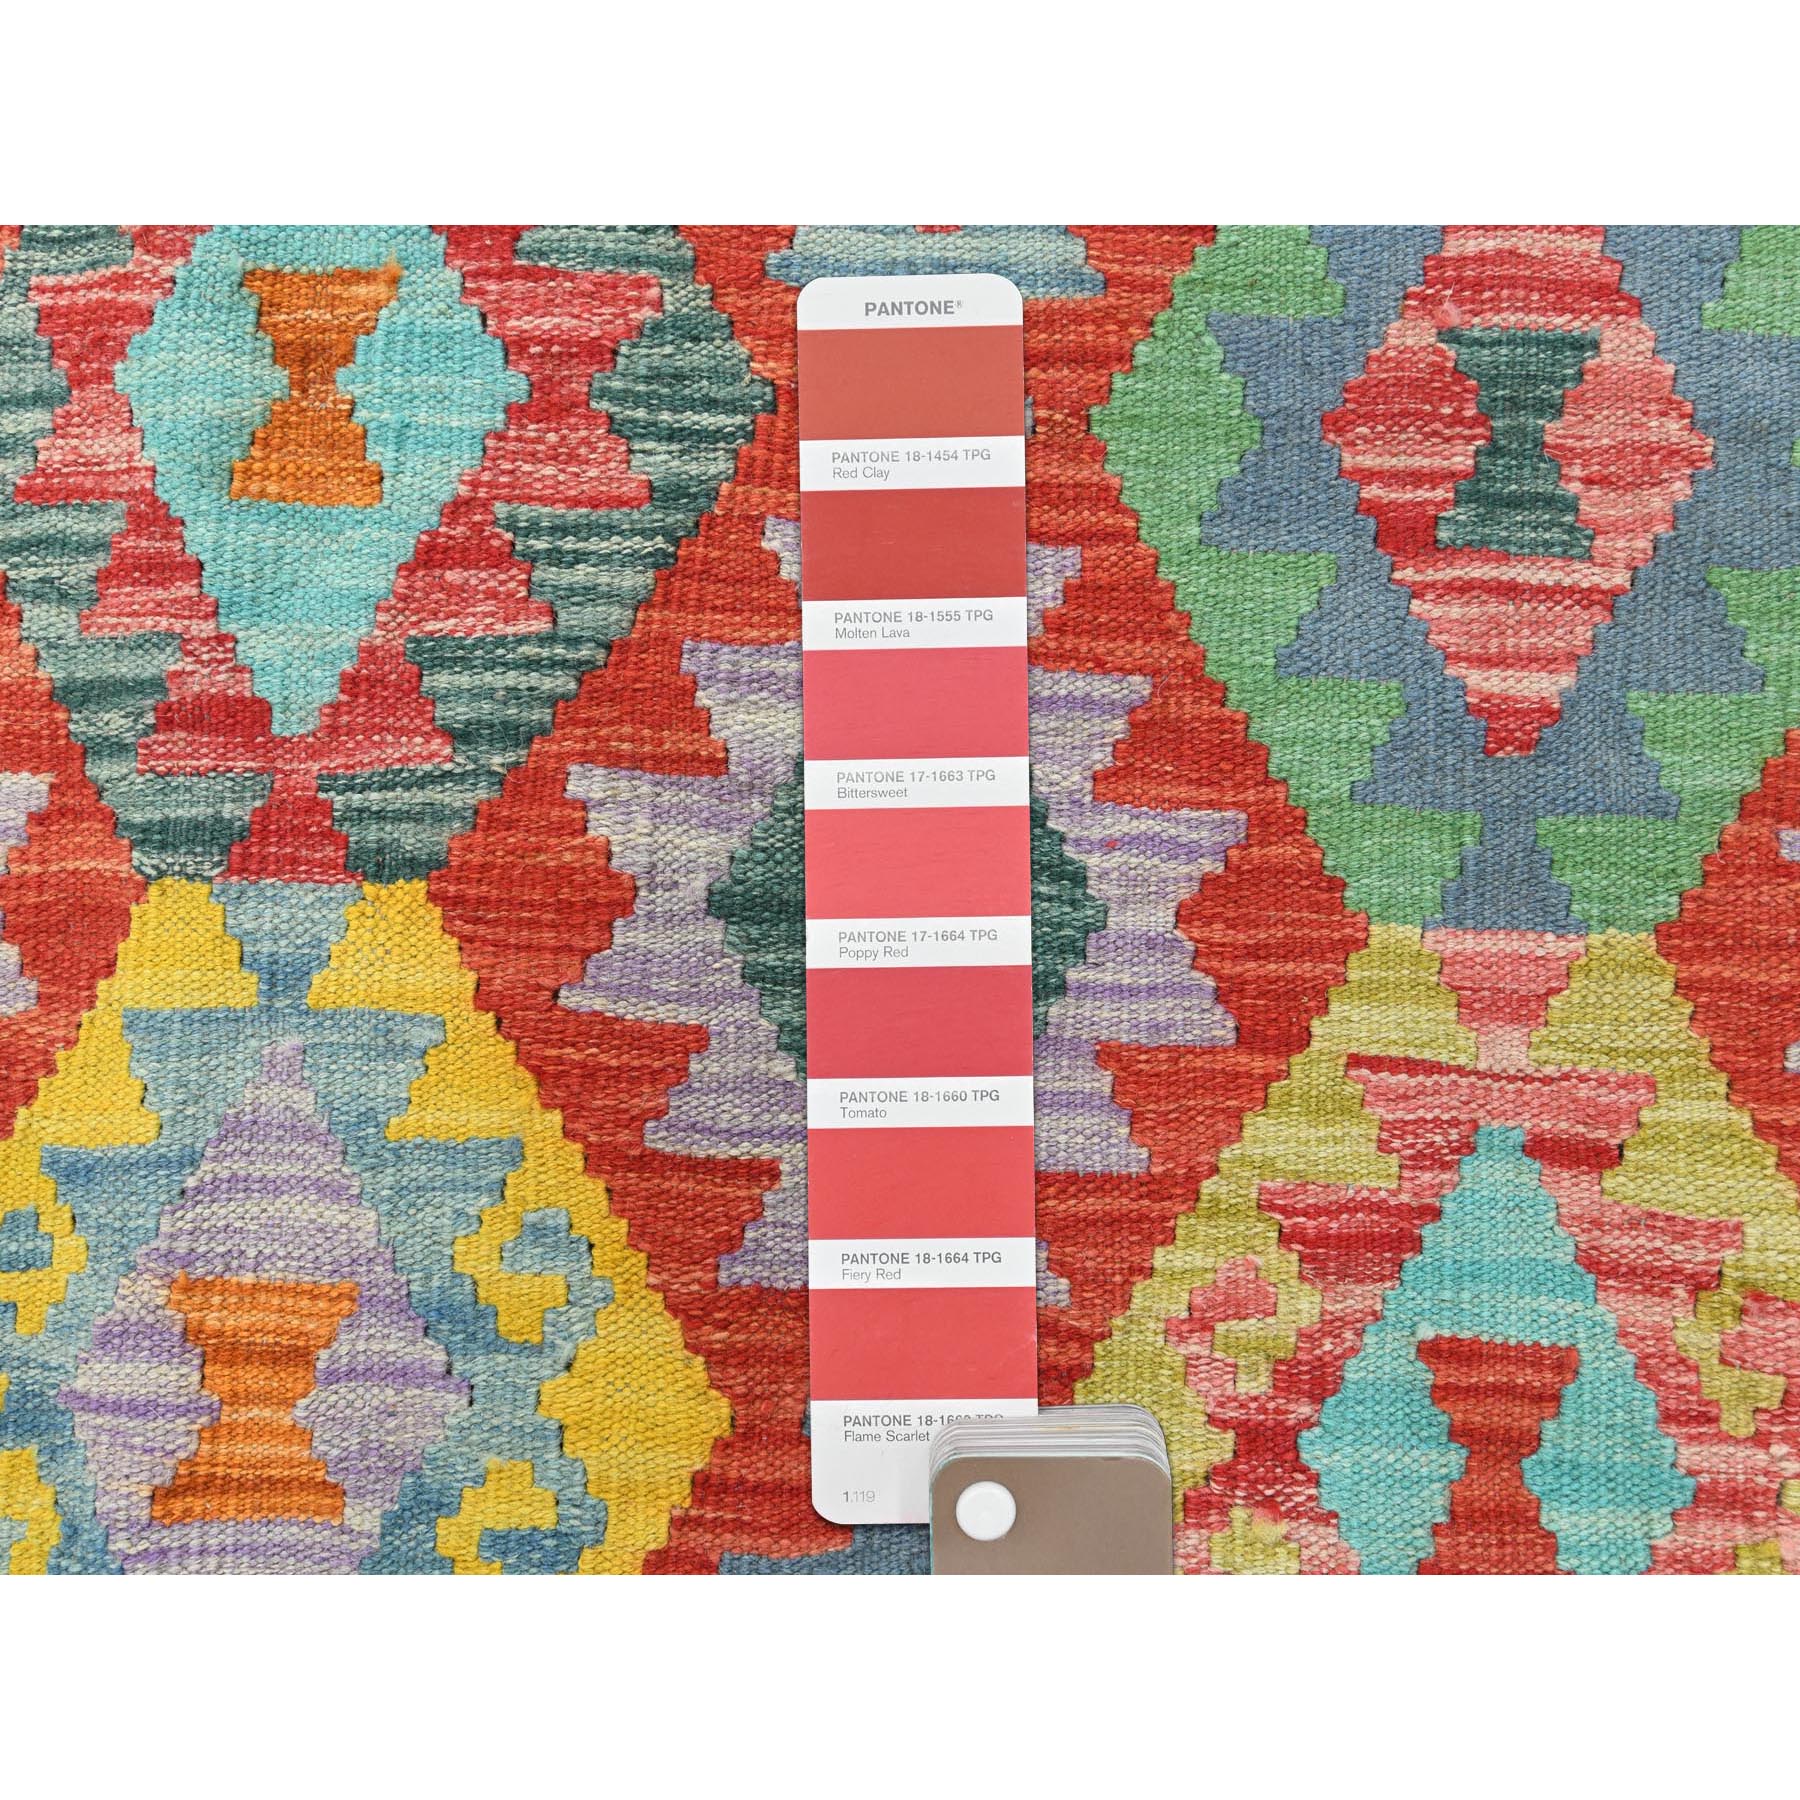 13'1"x16'2" Colorful, Shiny Wool Hand Woven, Afghan Kilim with Geometric Design Flat Weave Veggie Dyes, Reversible Oversized Oriental Rug 